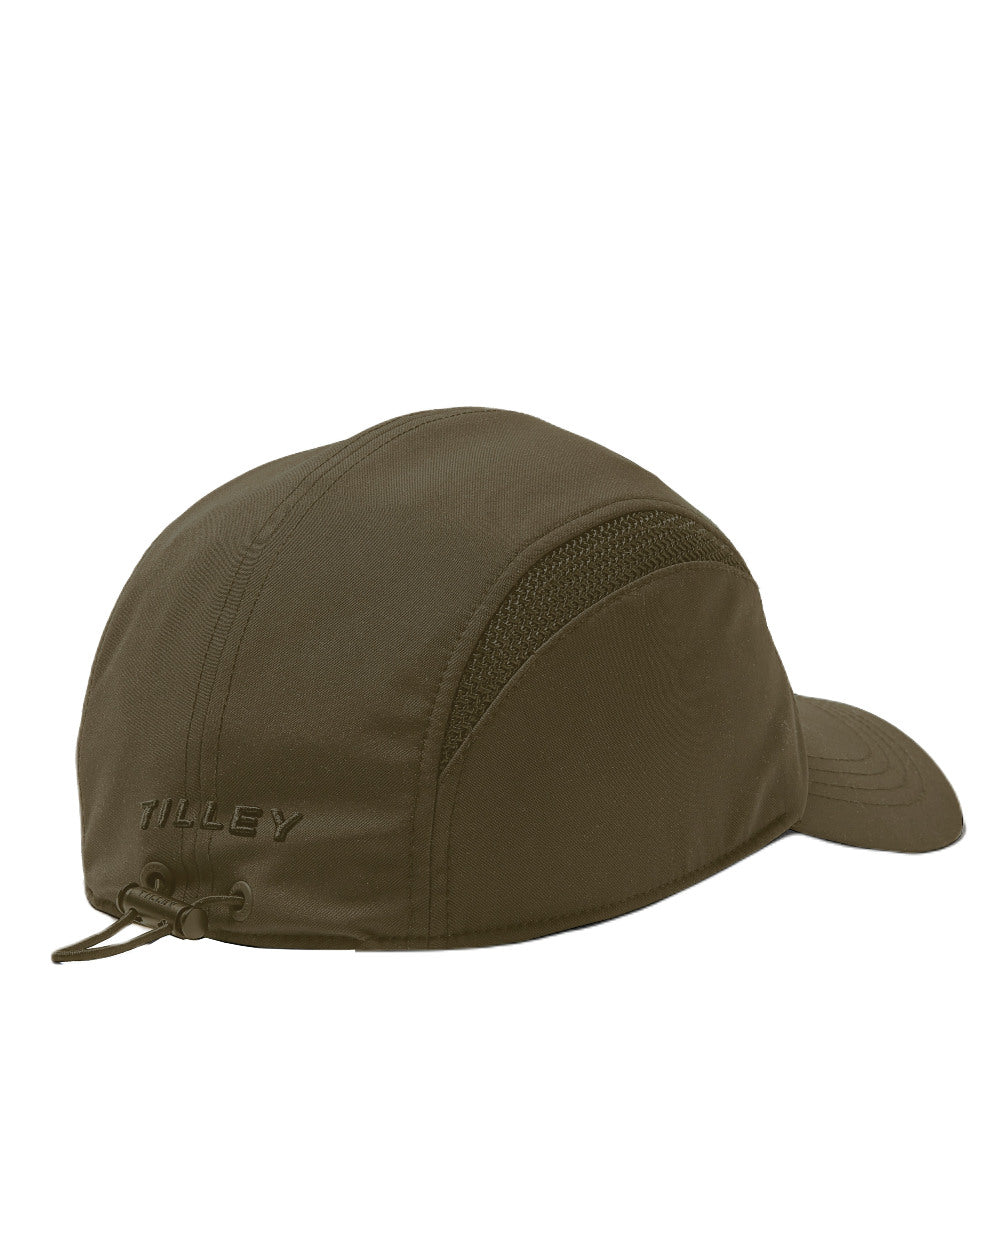 Olive Coloured Tilley Hat Airflo Cap On A White Background 